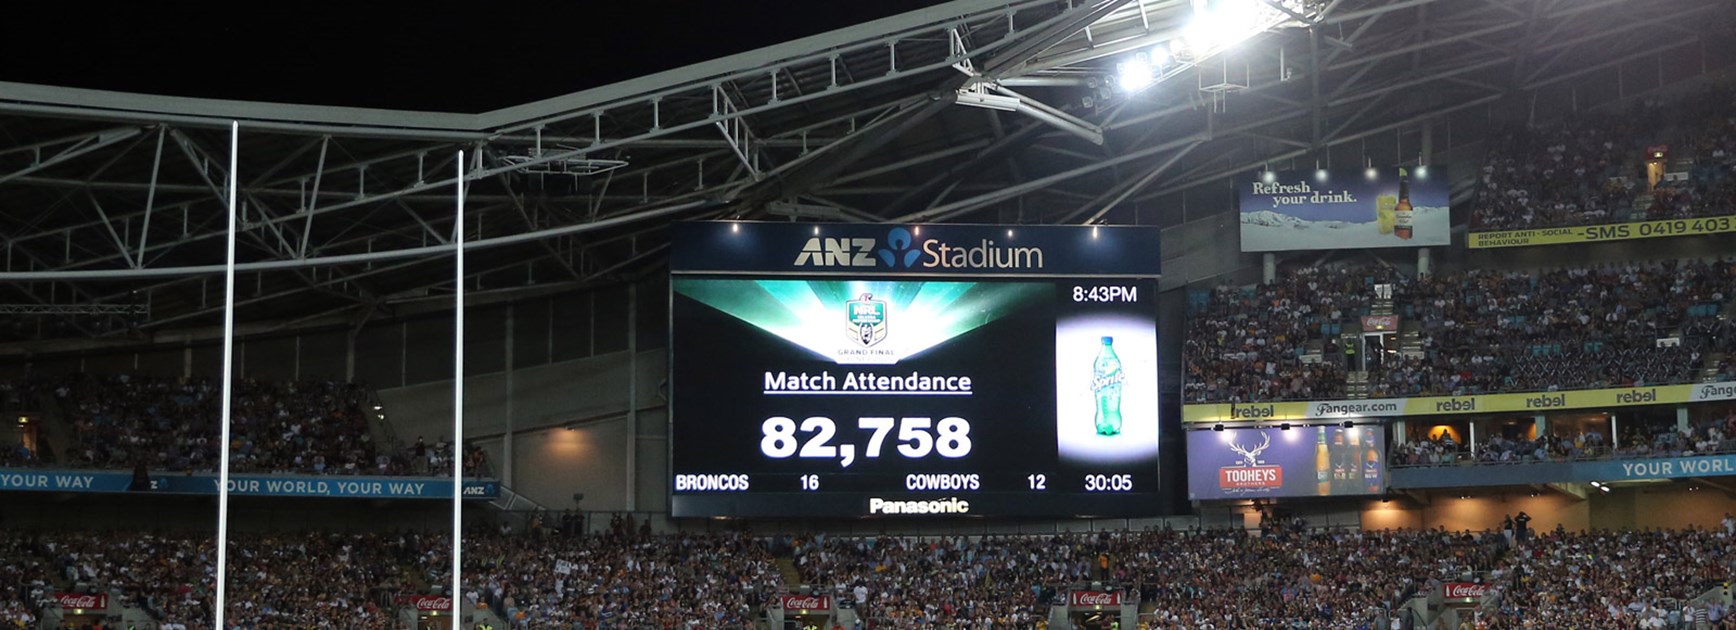 82,758 fans attended the 2015 NRL Telstra Premiership Grand Final at ANZ Stadium.